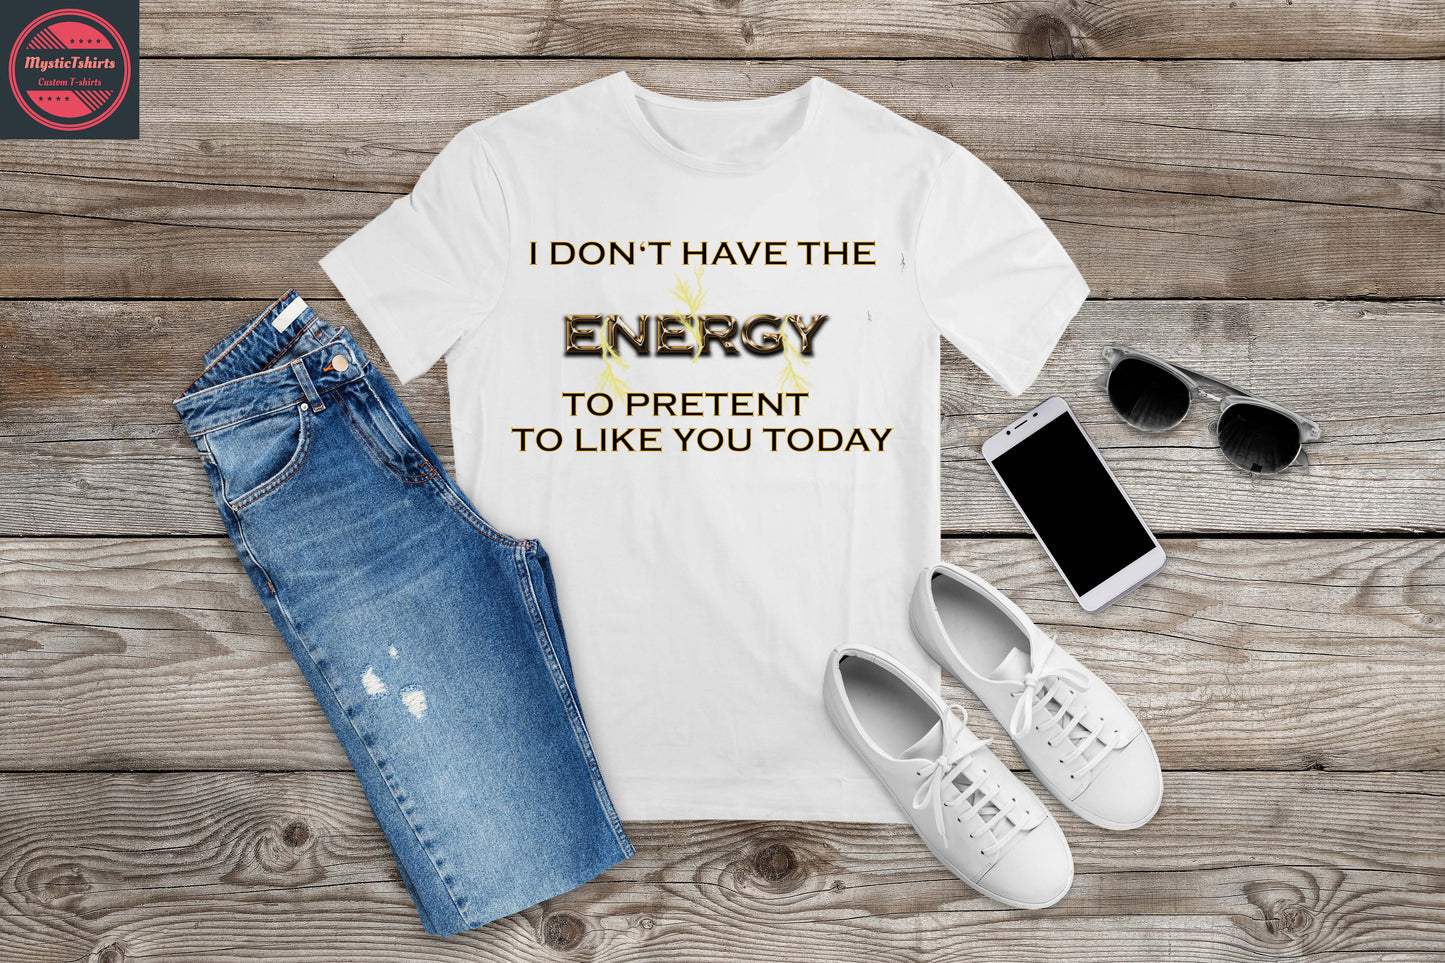 209. I DON'T HAVE THE ENERGY , Custom Made Shirt, Personalized T-Shirt, Custom Text, Make Your Own Shirt, Custom Tee